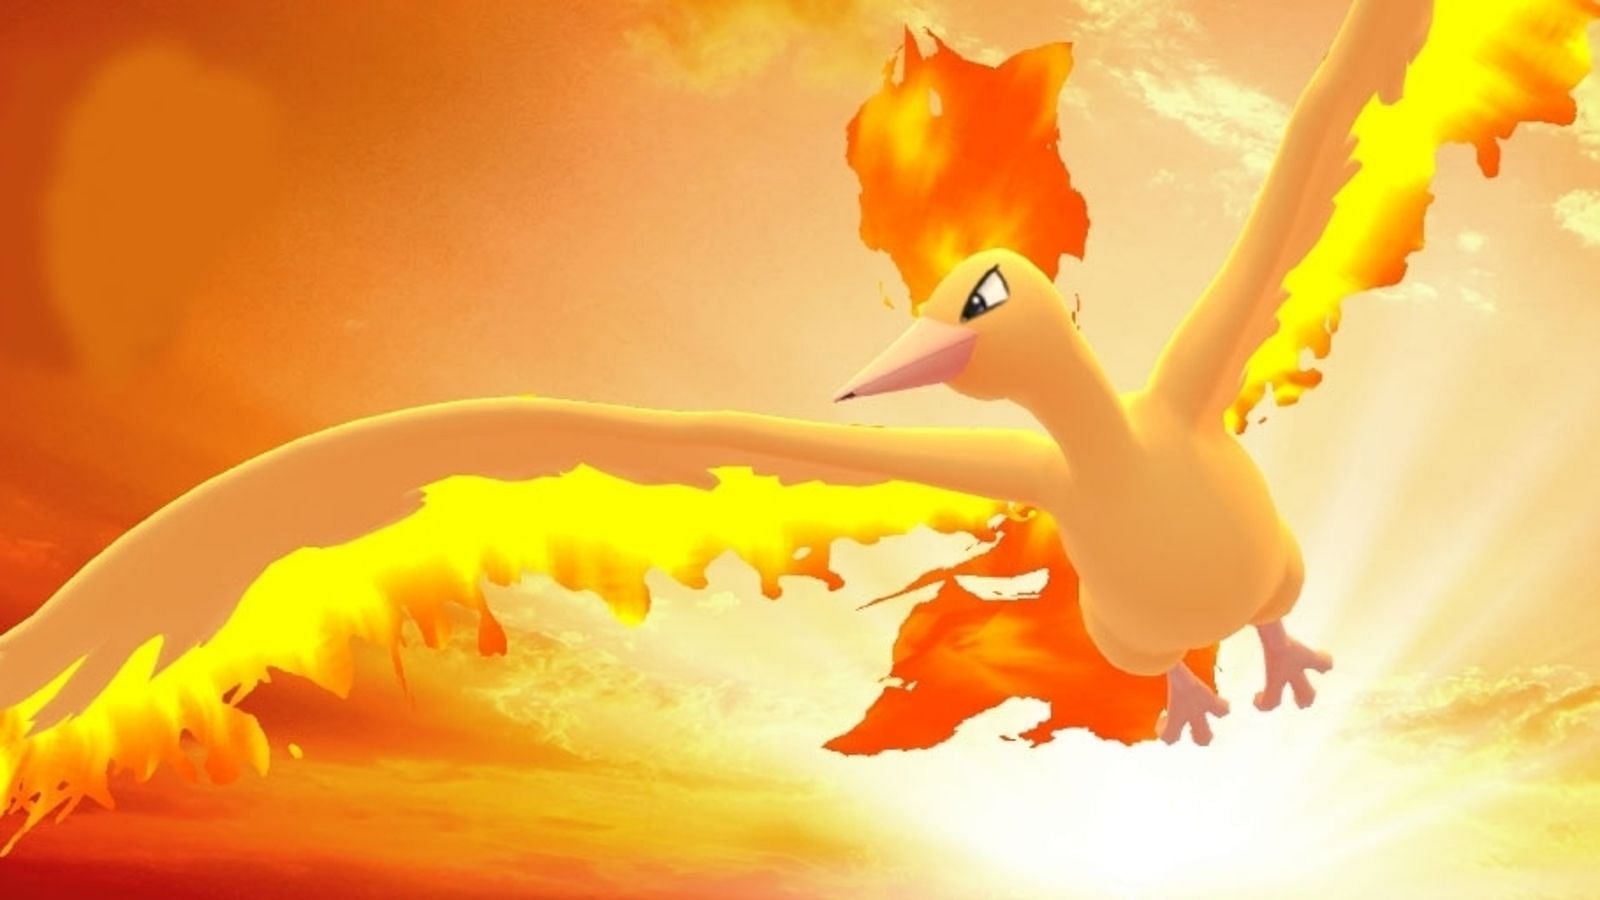 Moltres may be the best option to take on Pheromosa in Pokemon GO (Image via Niantic)